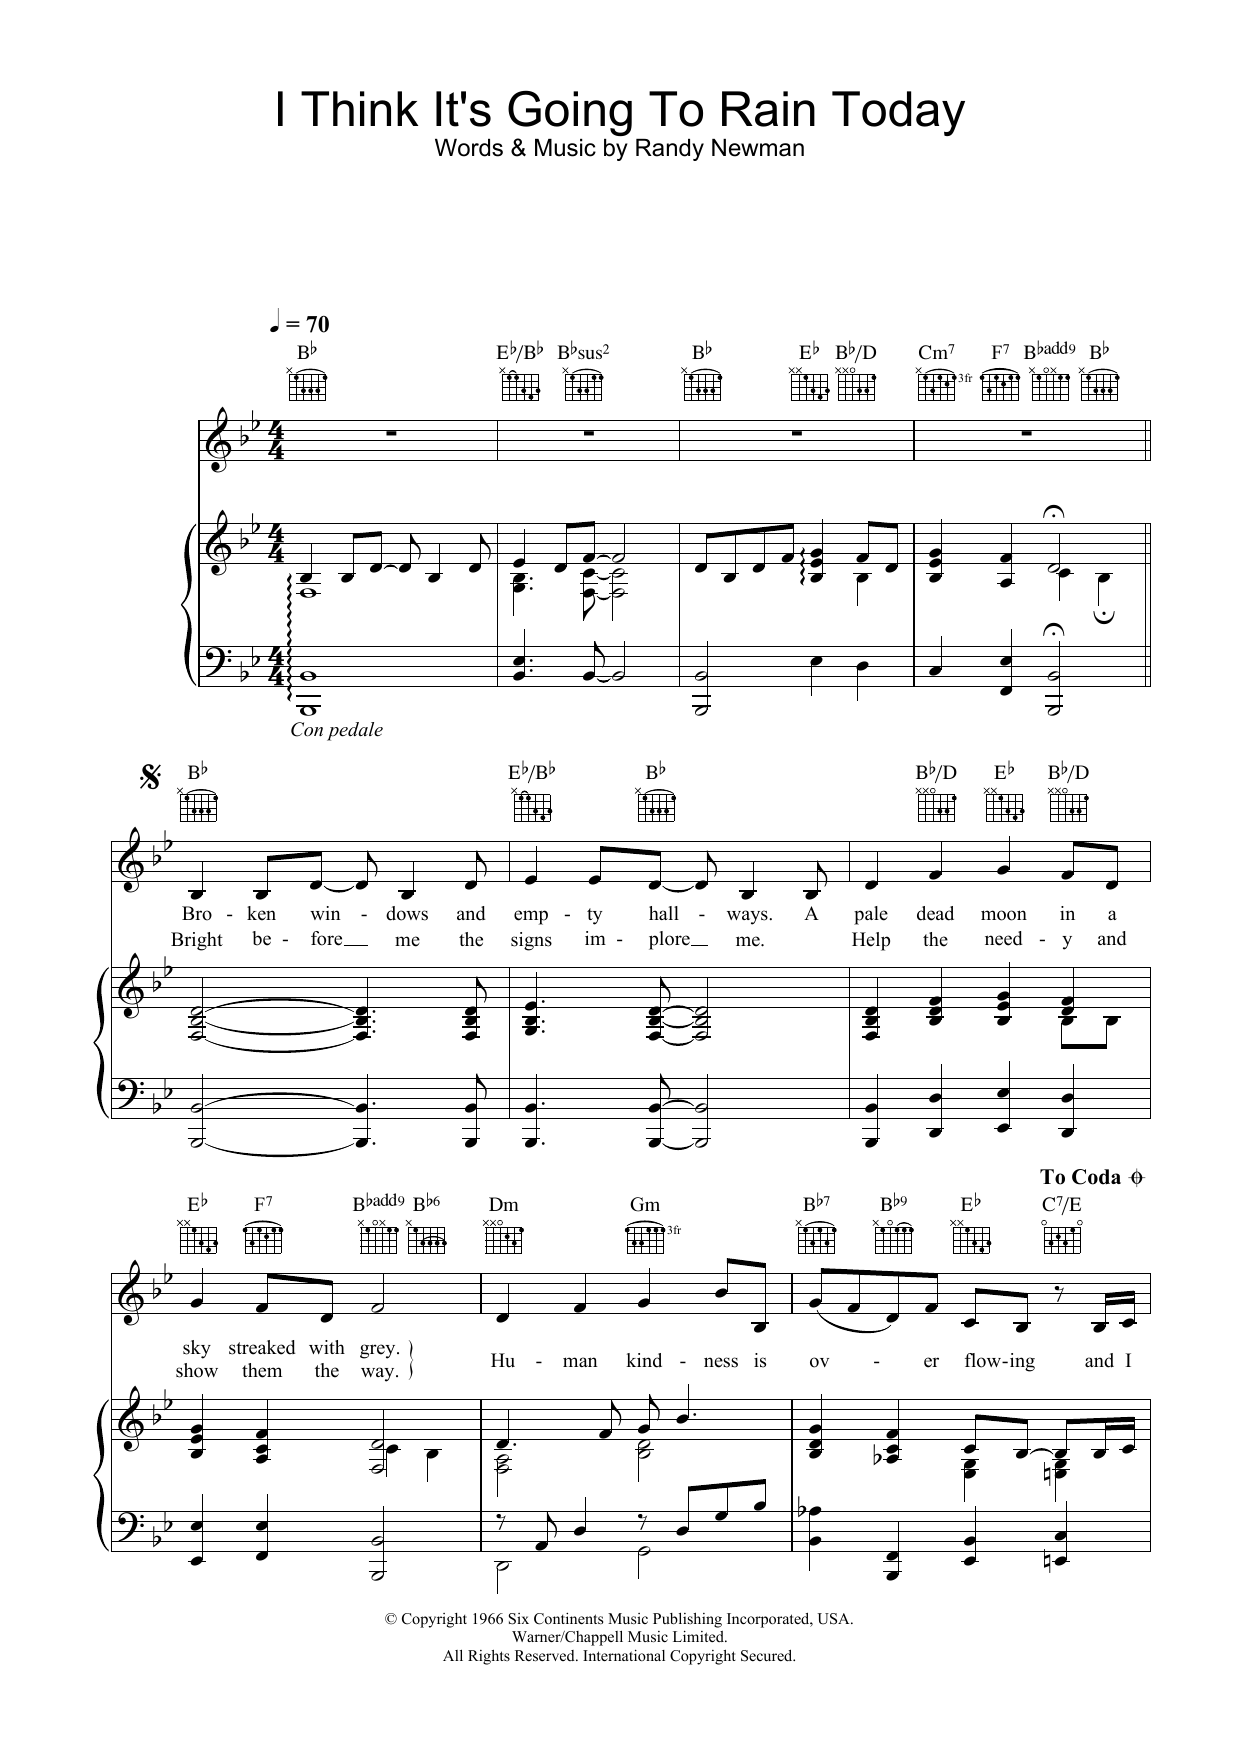 Download Katie Melua I Think It's Going To Rain Today Sheet Music